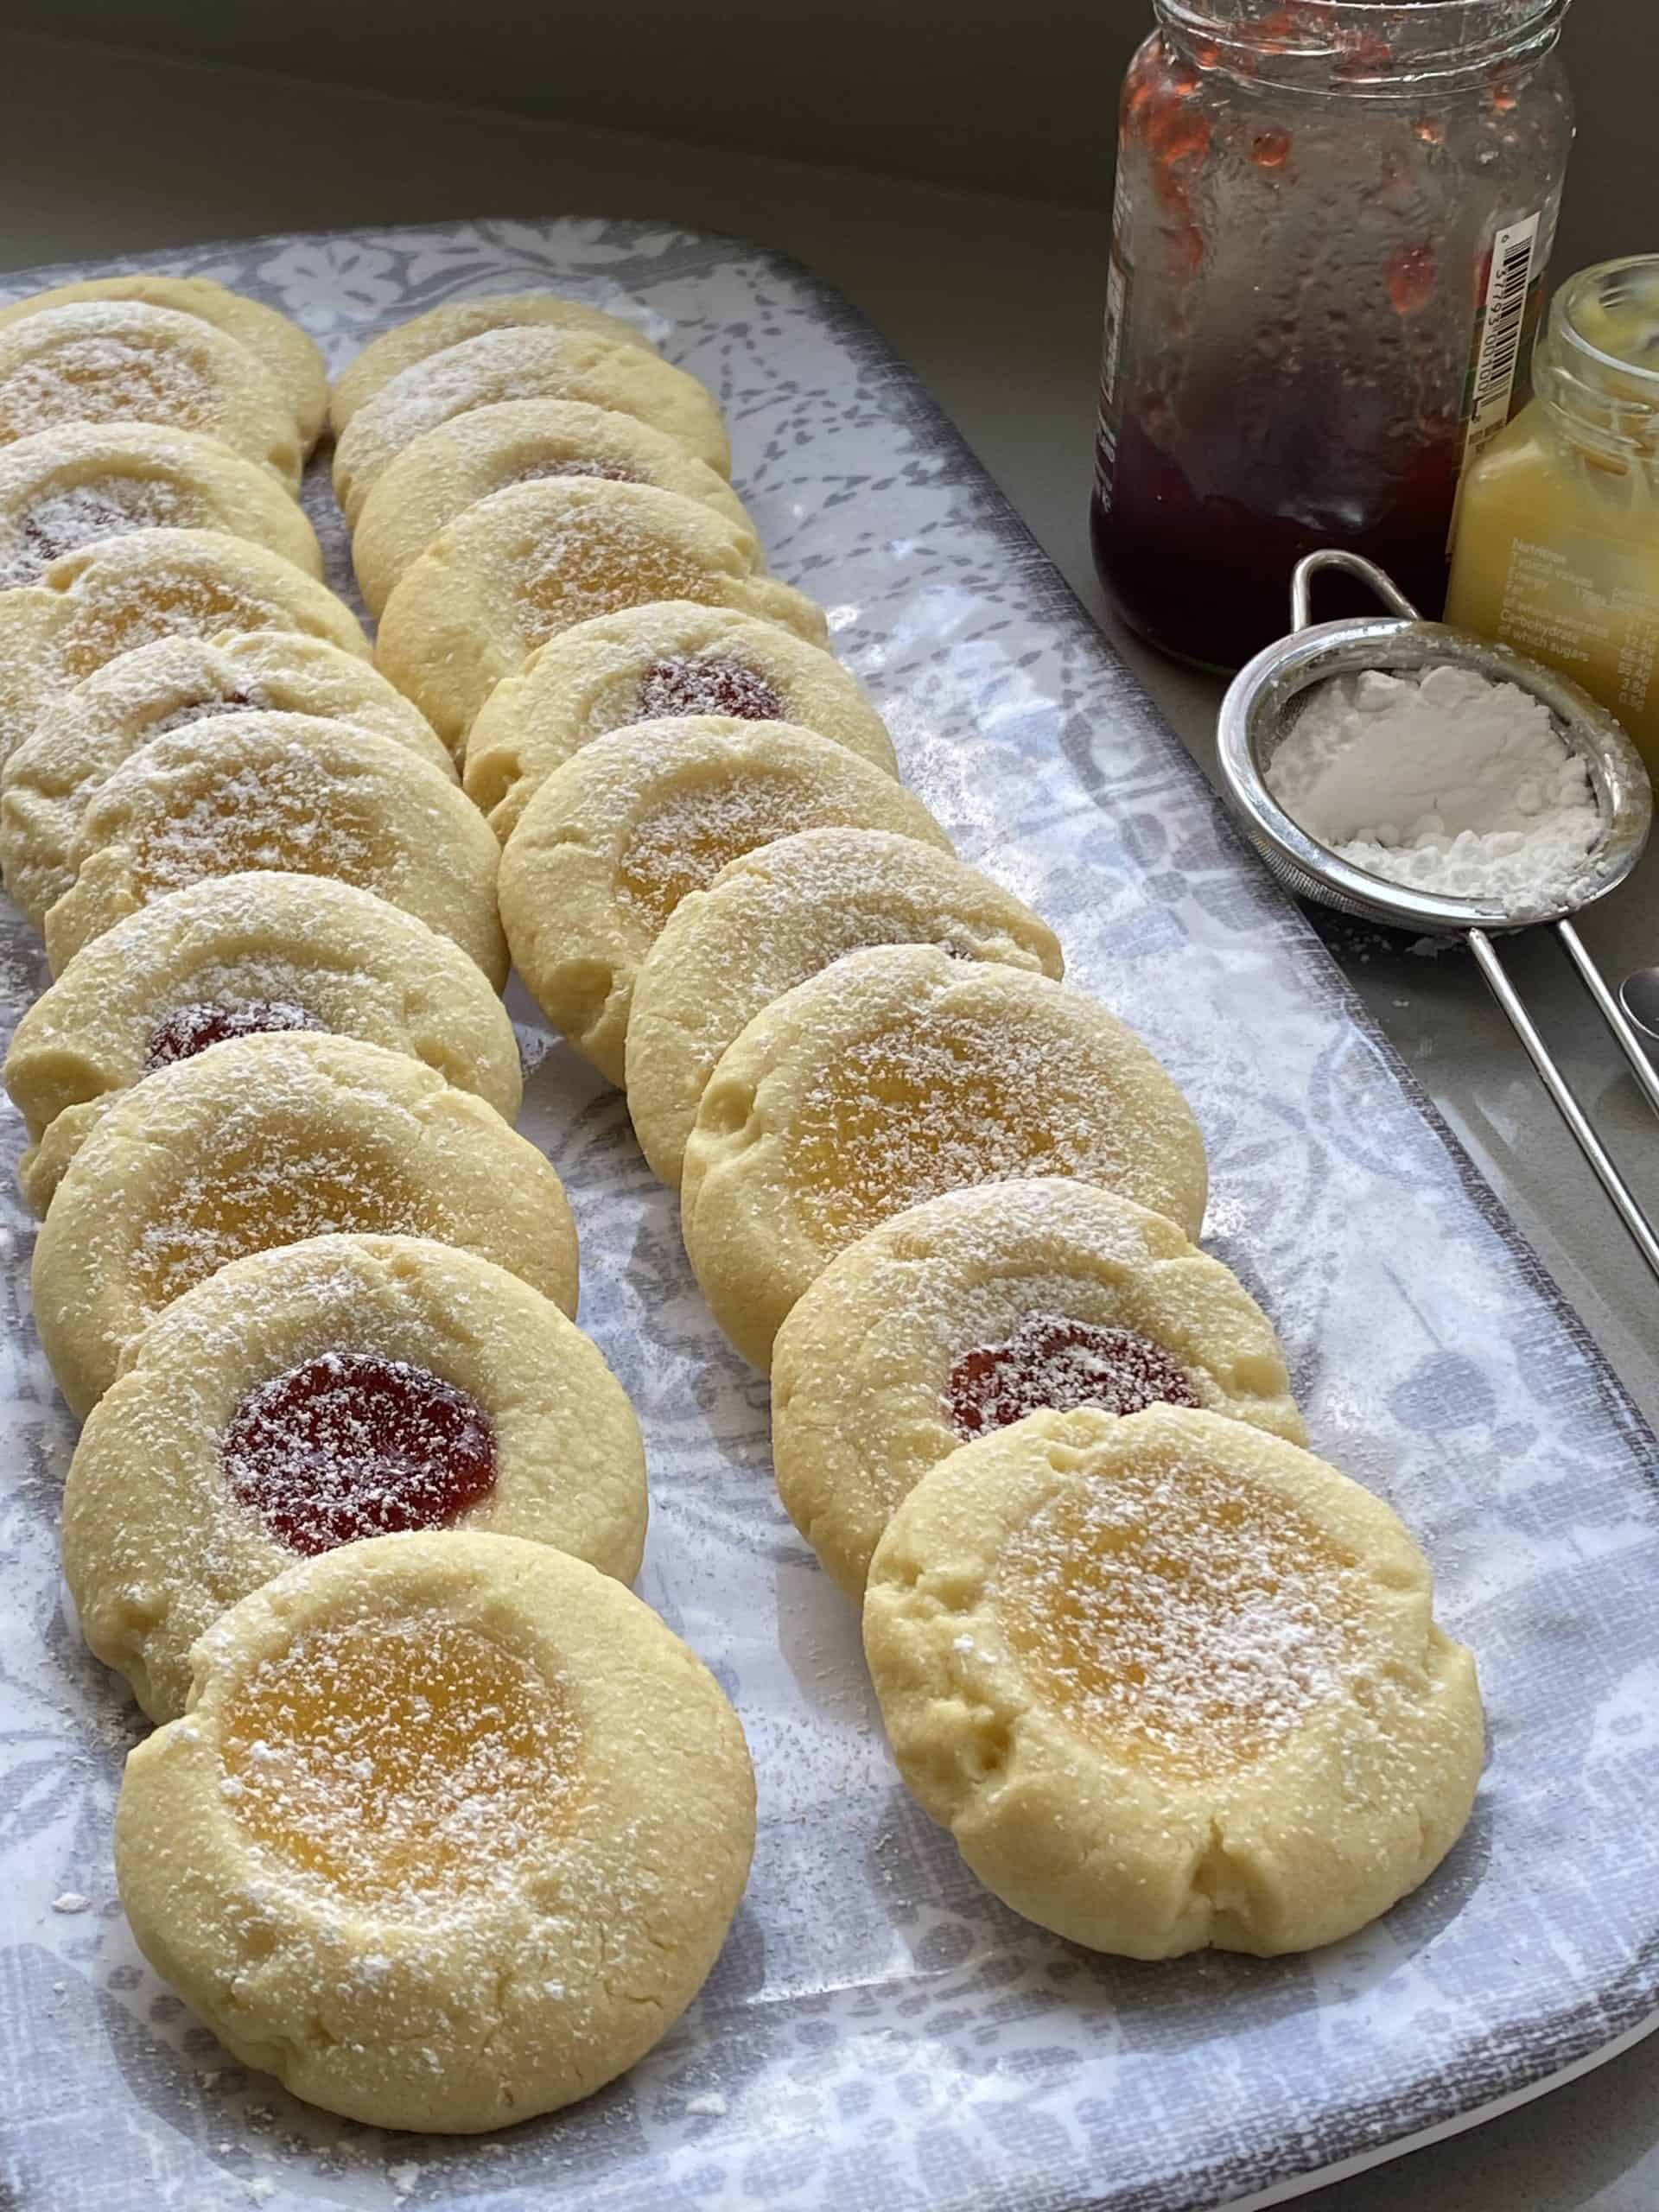 Thumbprint Biscuits on a grey tray